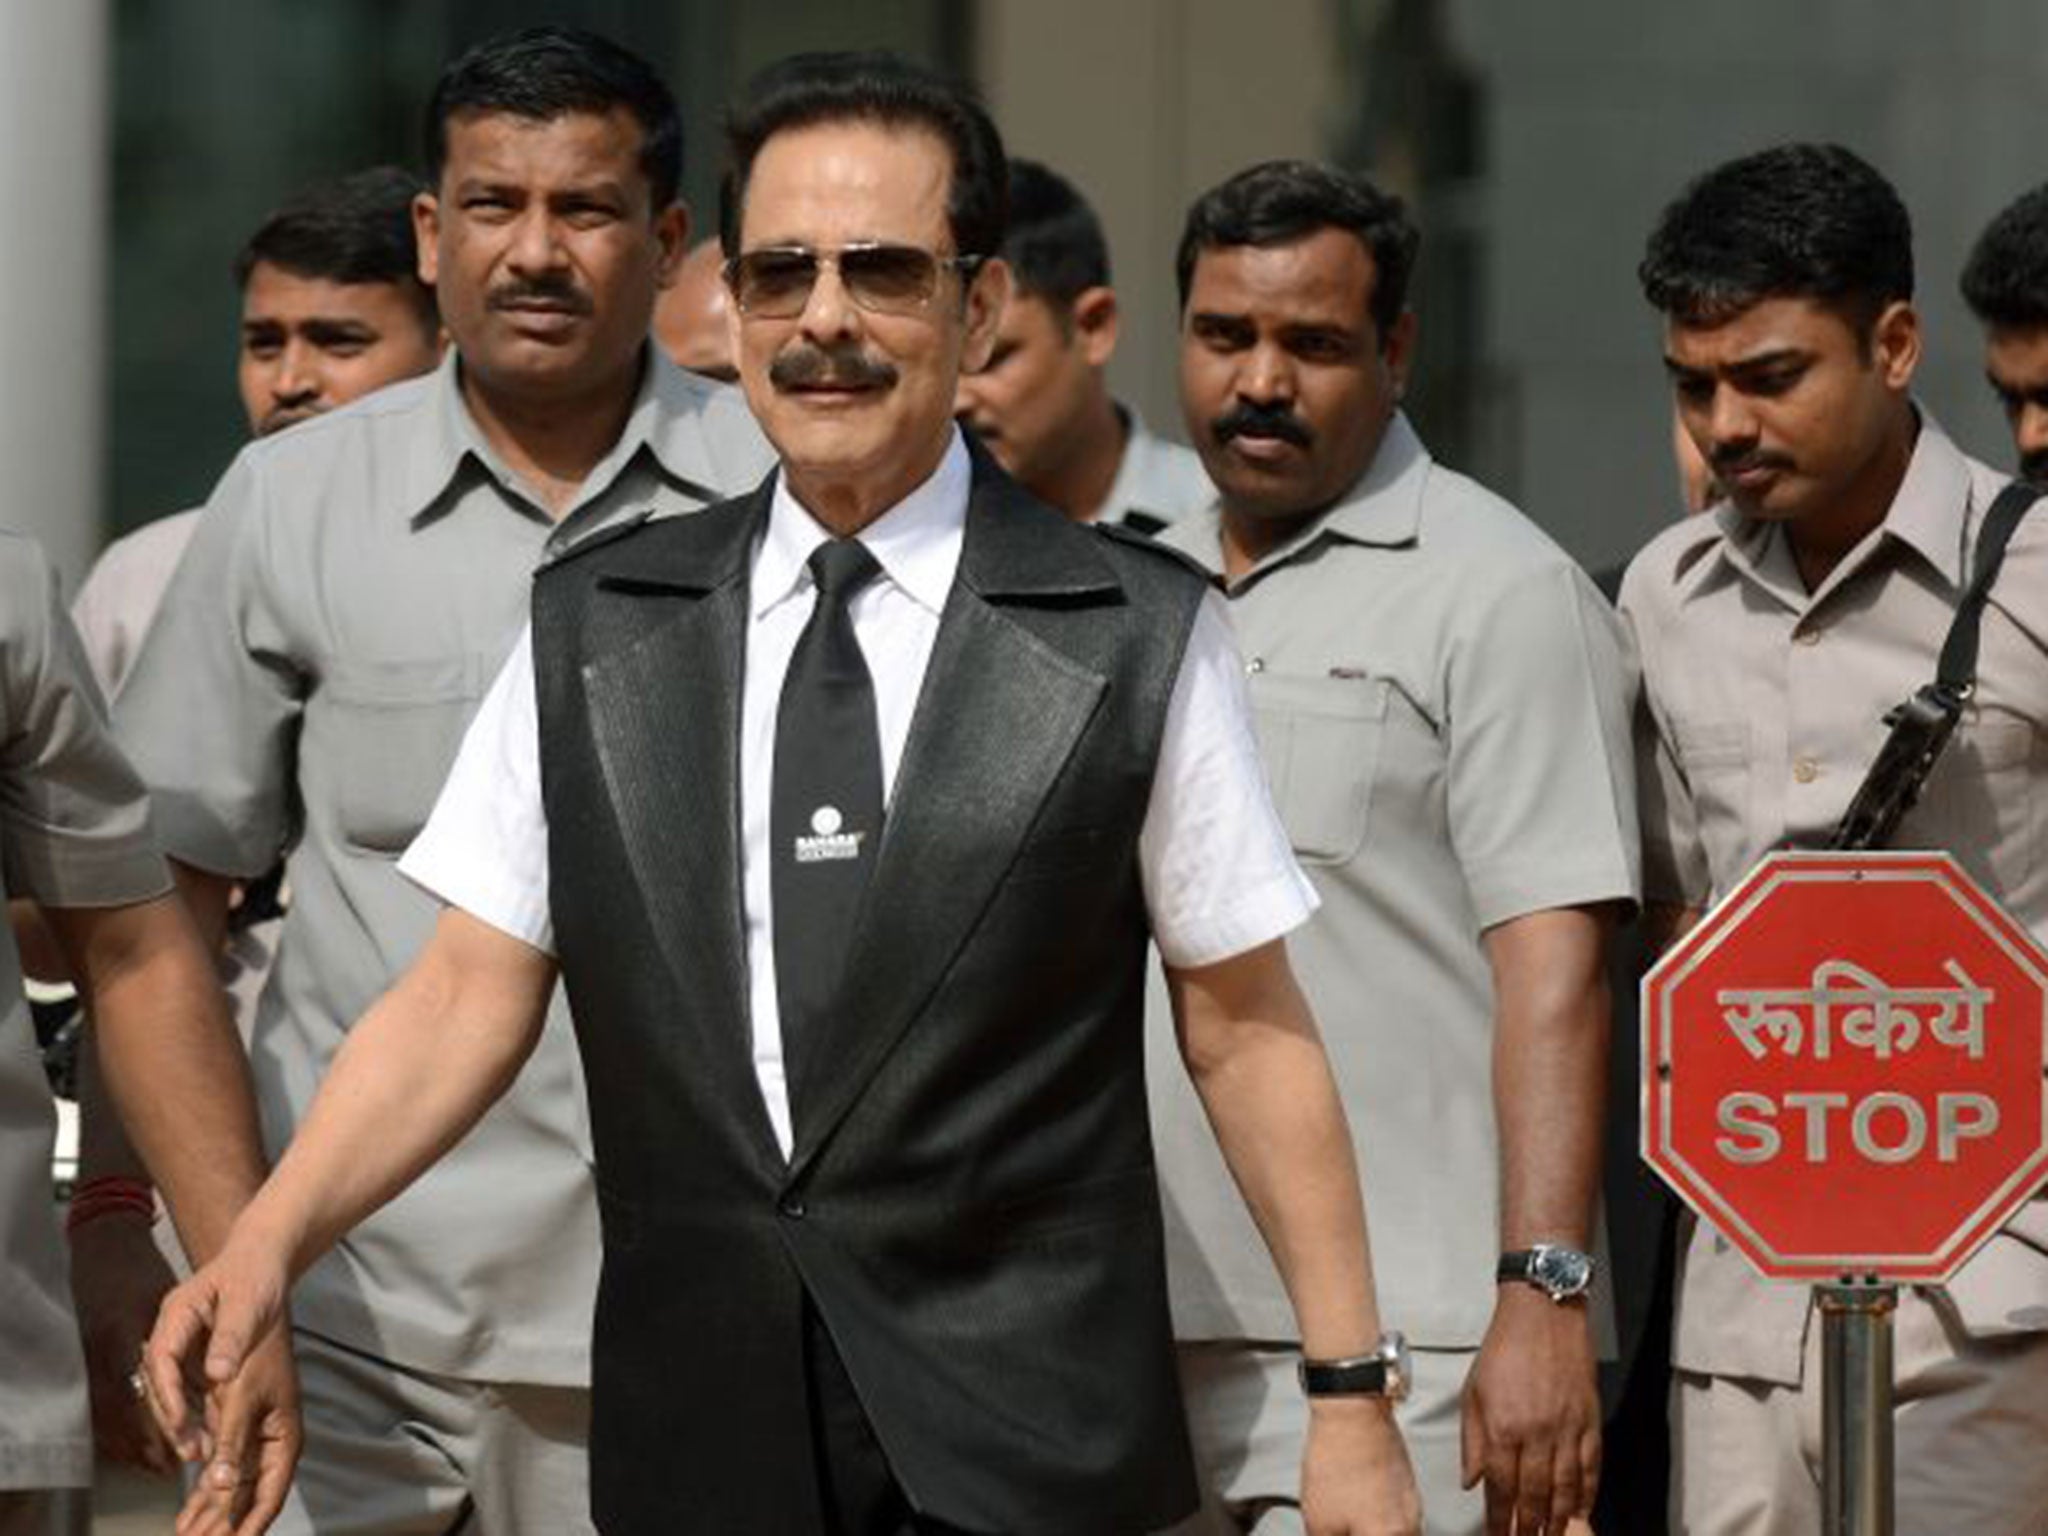 Subrata Roy, flanked by bodyguards, in Mumbai before his arrest